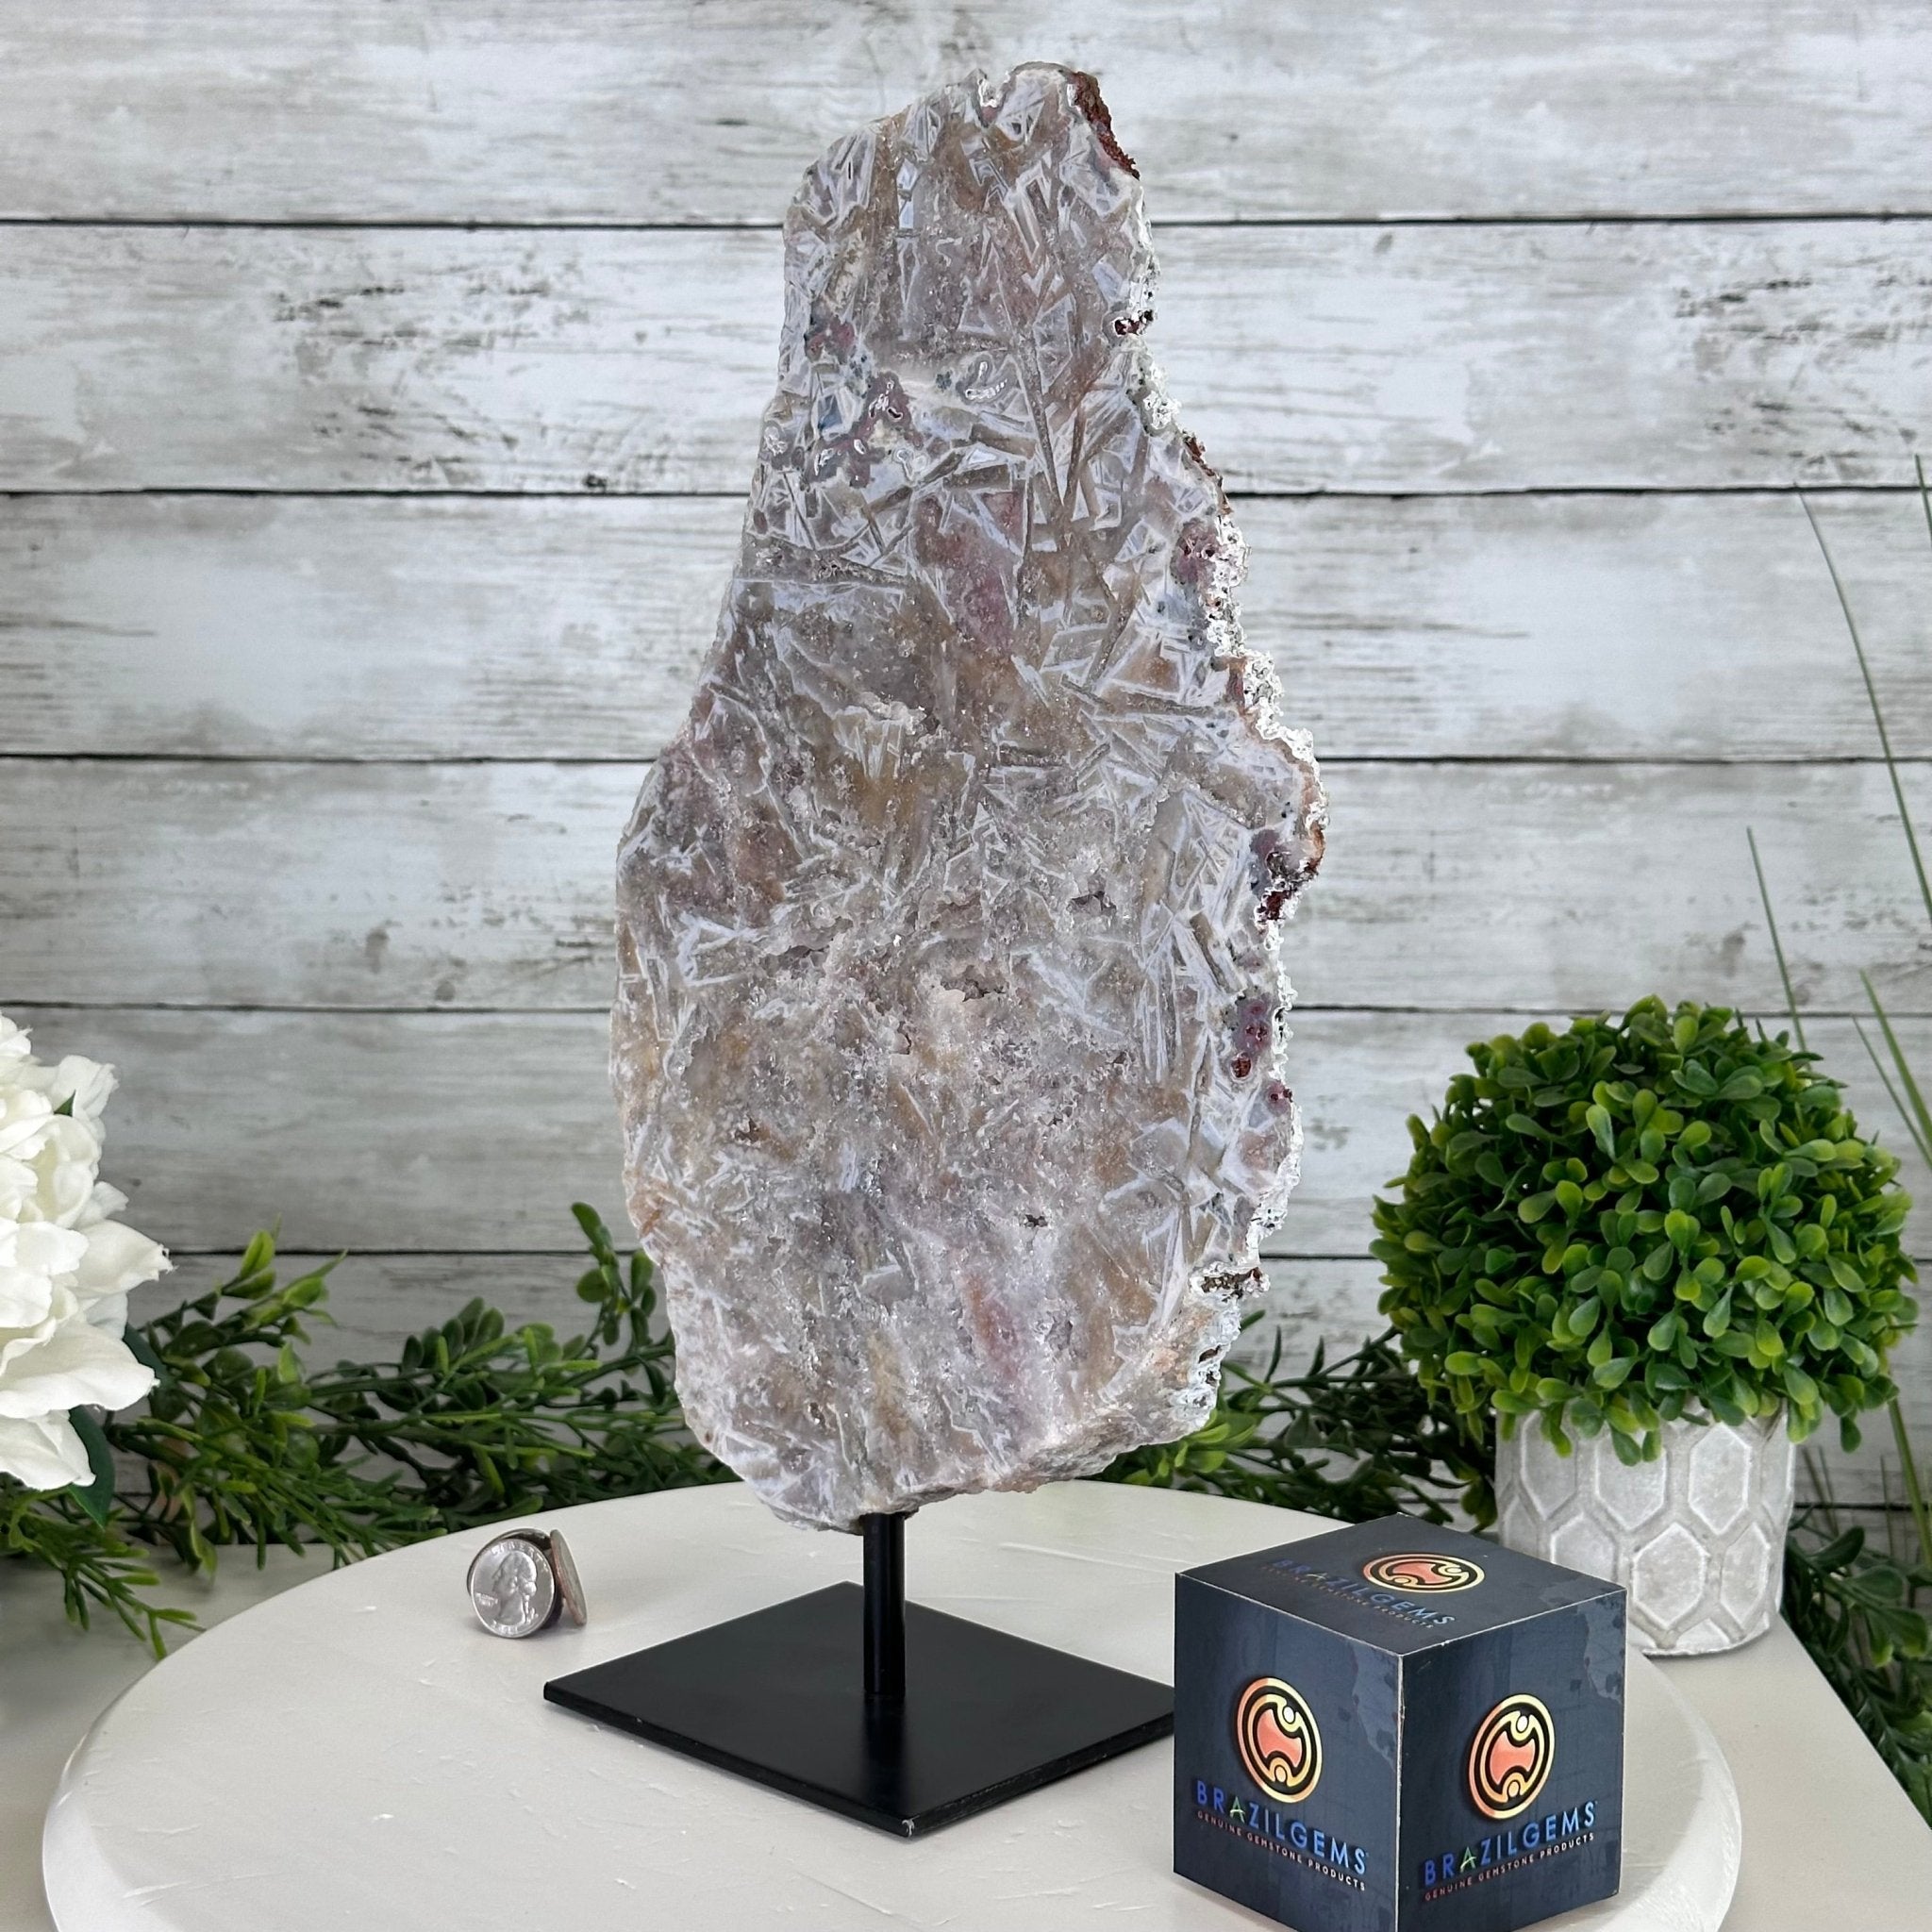 Pink Amethyst Slice on a Stand, 6.8 lbs and 14.6" Tall #5742-0124 - Brazil GemsBrazil GemsPink Amethyst Slice on a Stand, 6.8 lbs and 14.6" Tall #5742-0124Slices on Fixed Bases5742-0124